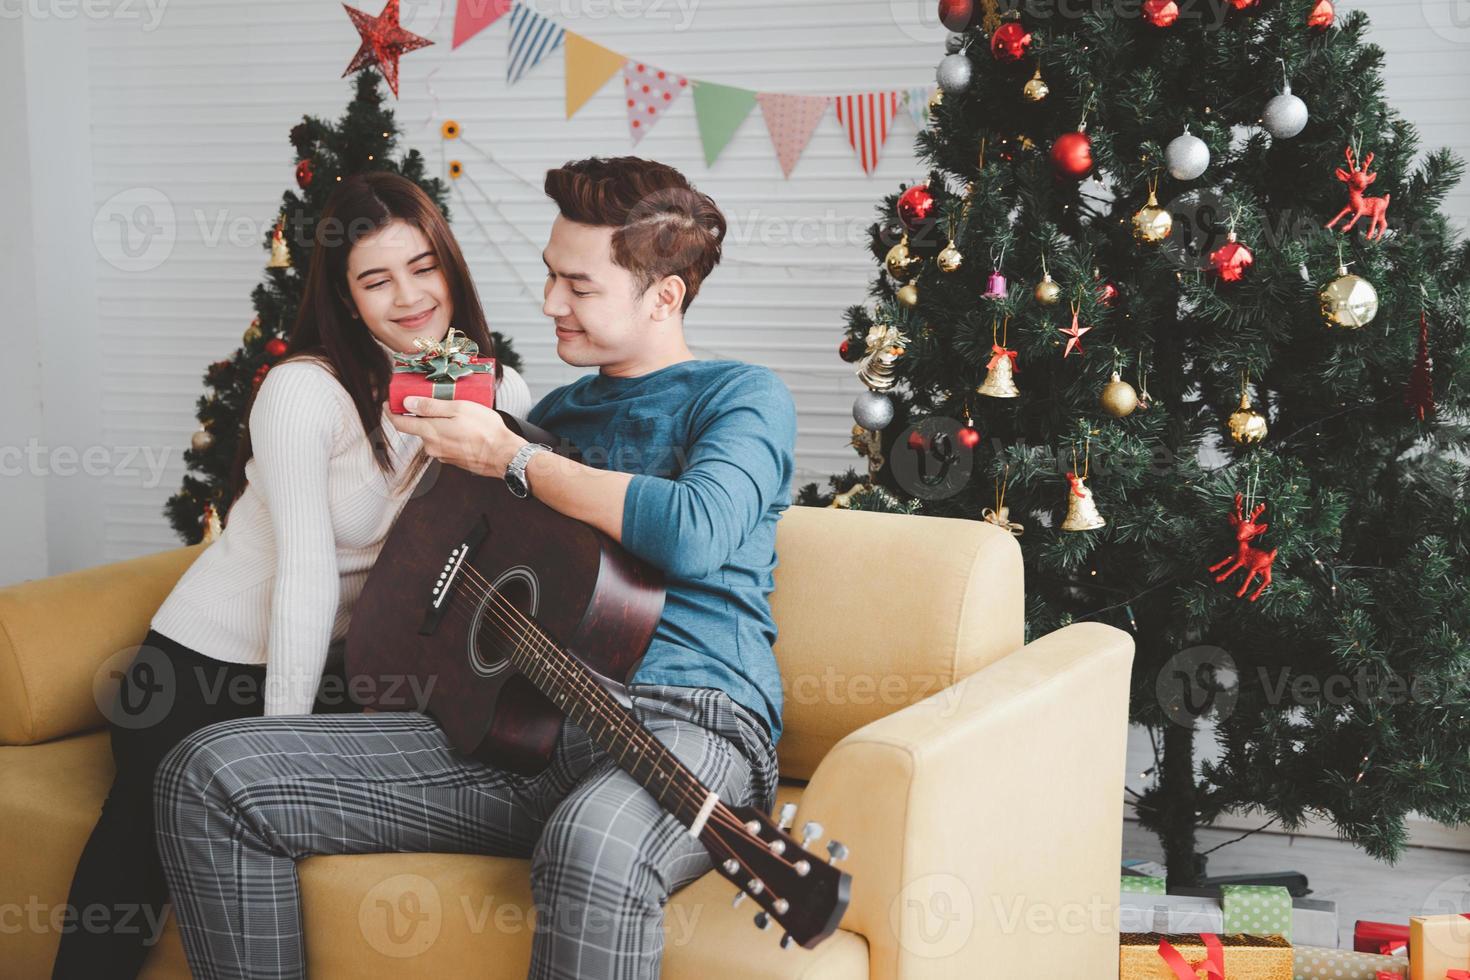 Young adult teenager love couple holding gift present box and looking each other during celebrateing christmas holiday together in living room with christmas tree ornament decoration photo